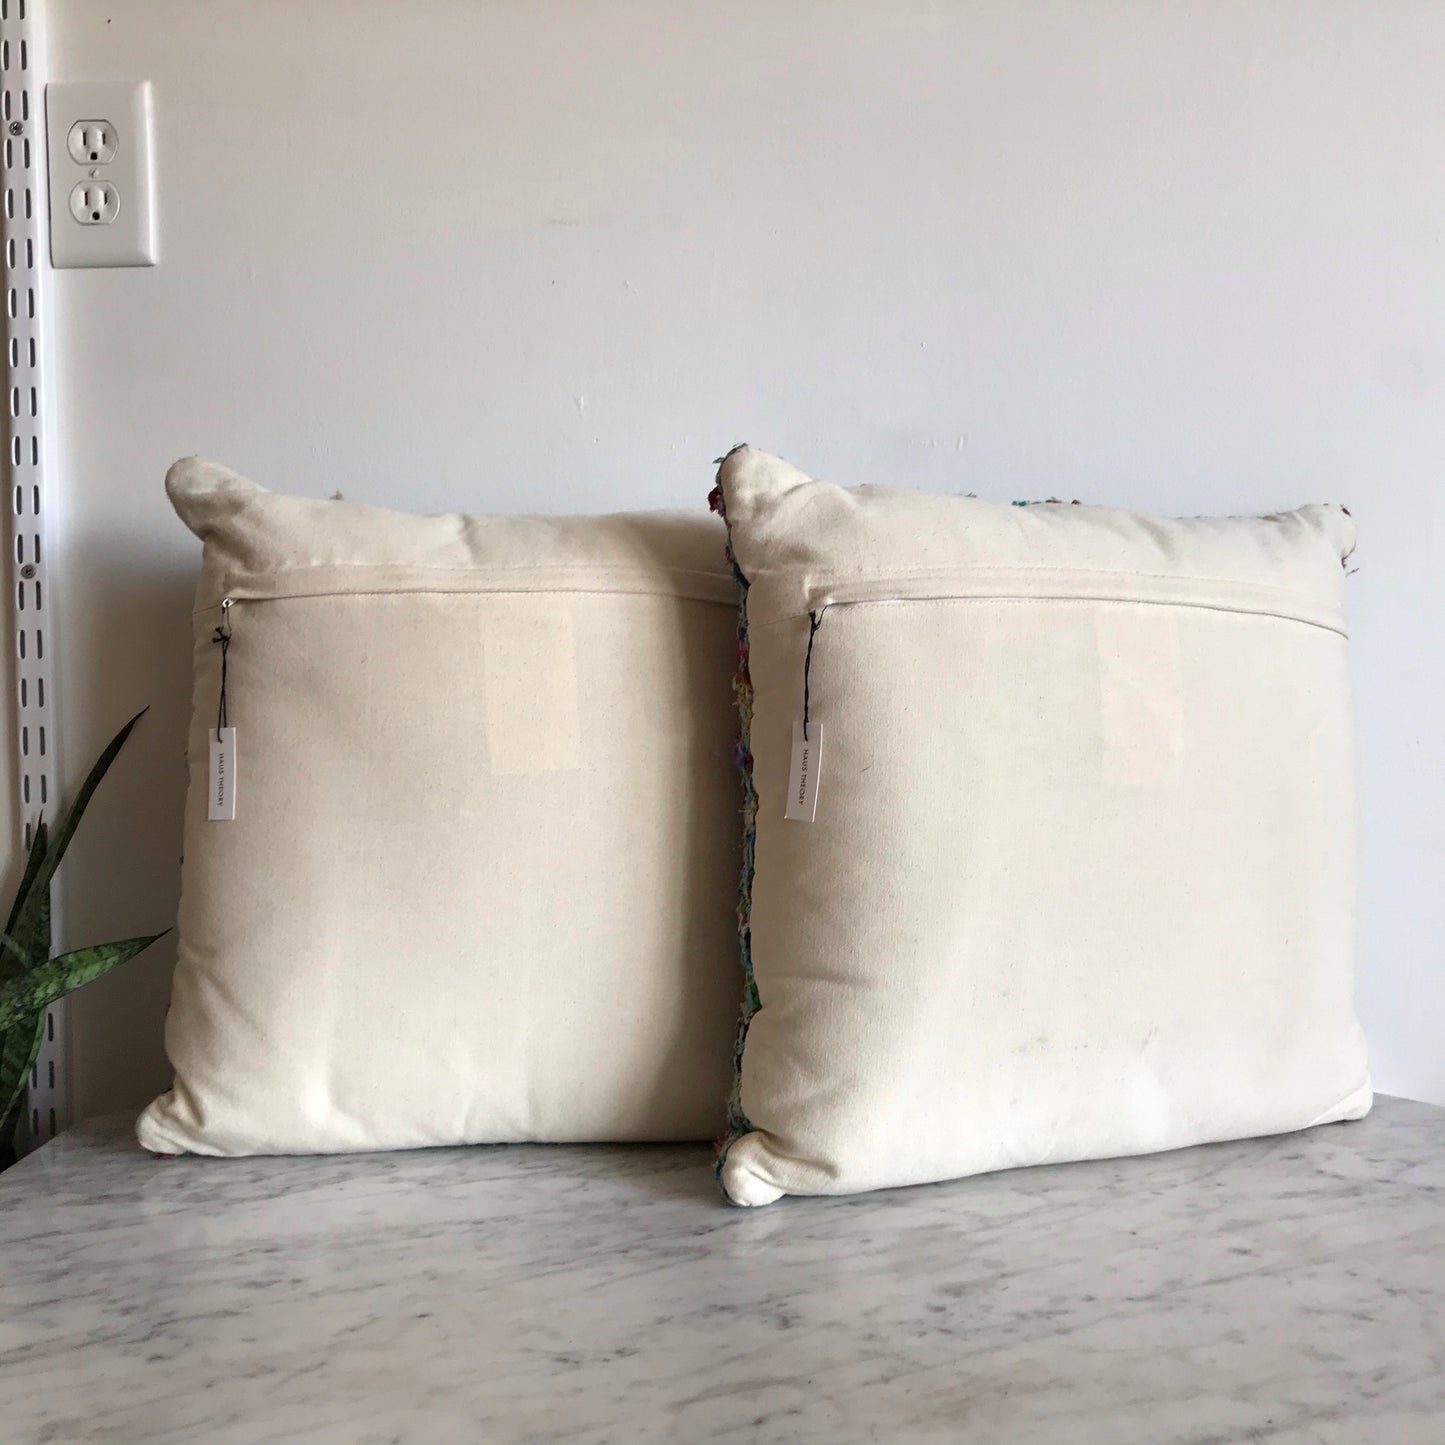 Pair of Woven Accent Pillows (16 x 16)